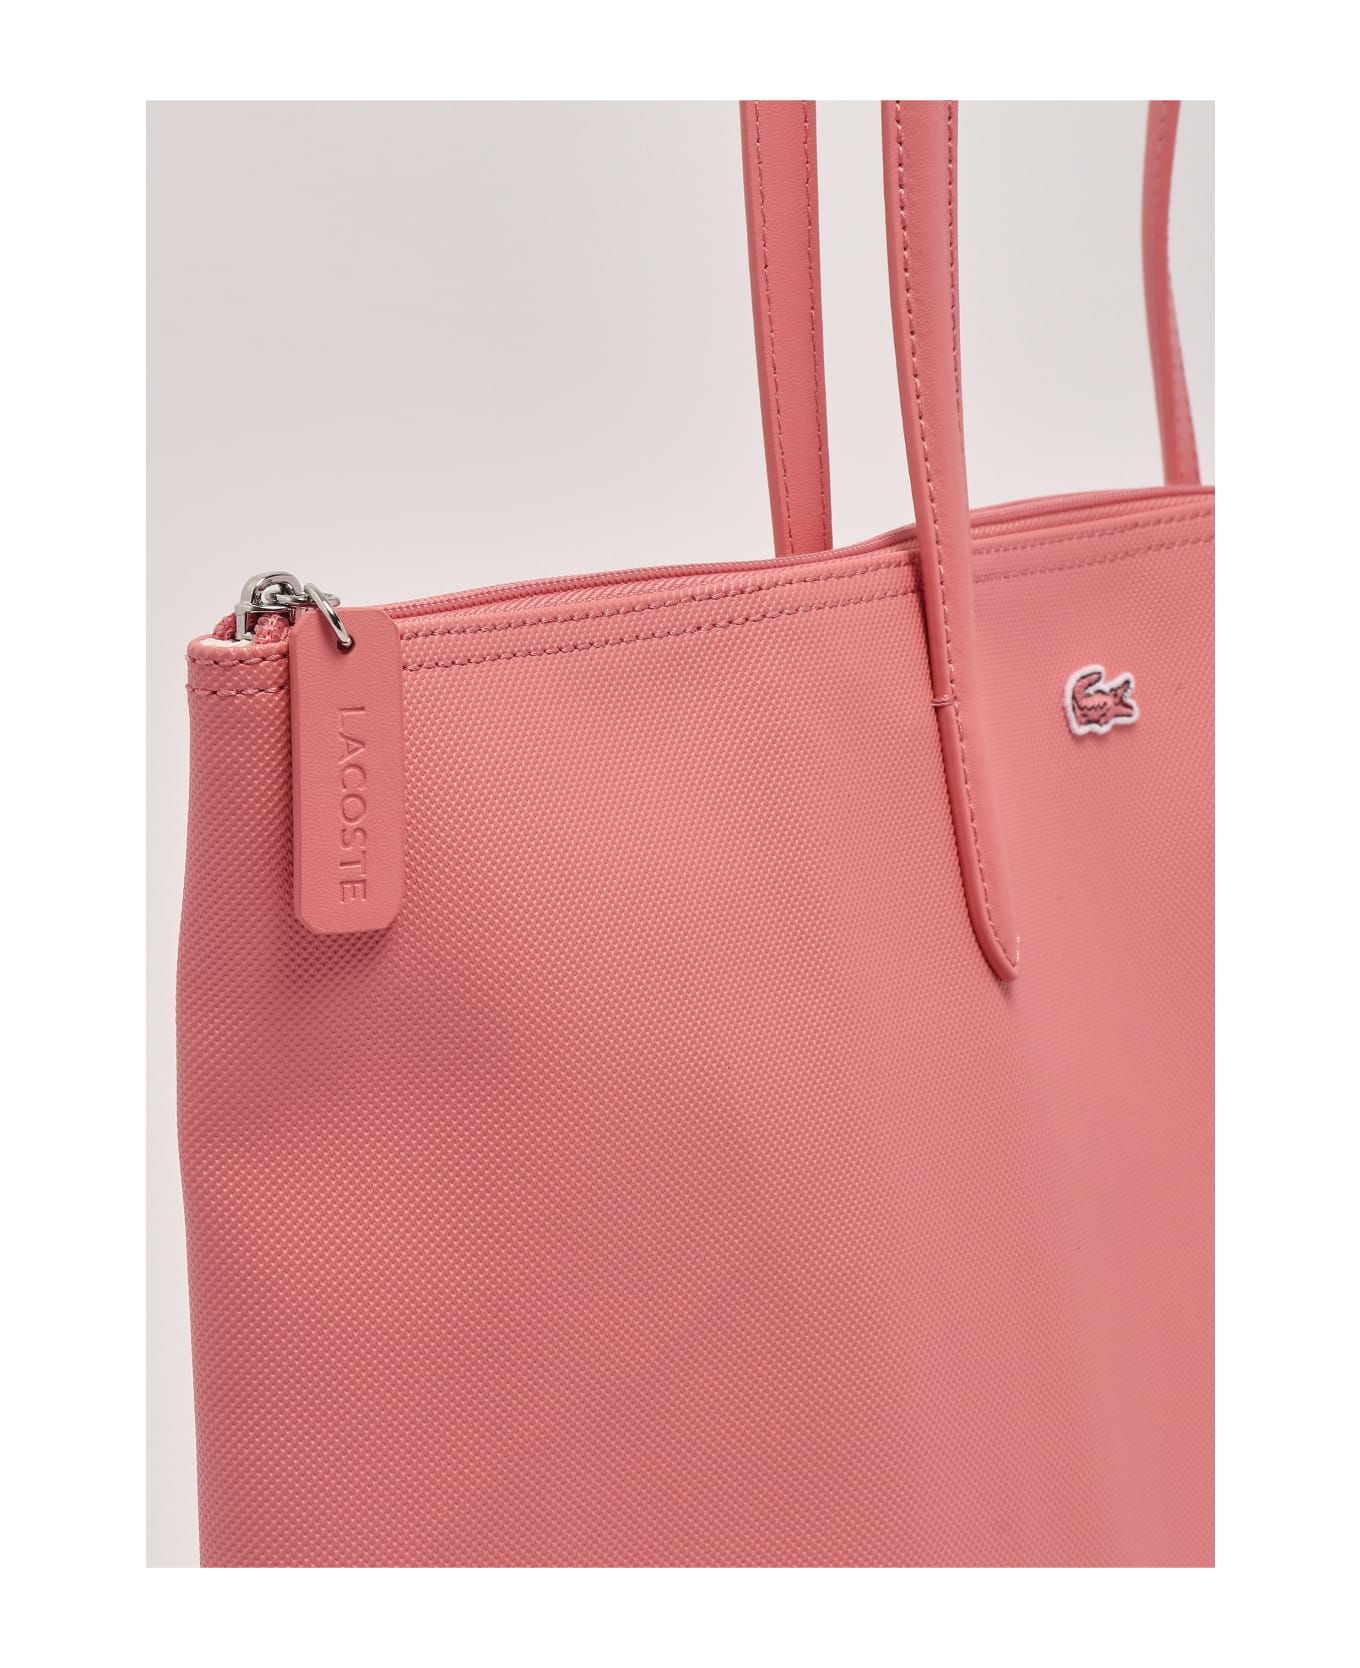 Lacoste Pvc Shopping Bag - ROSA CARICO トートバッグ